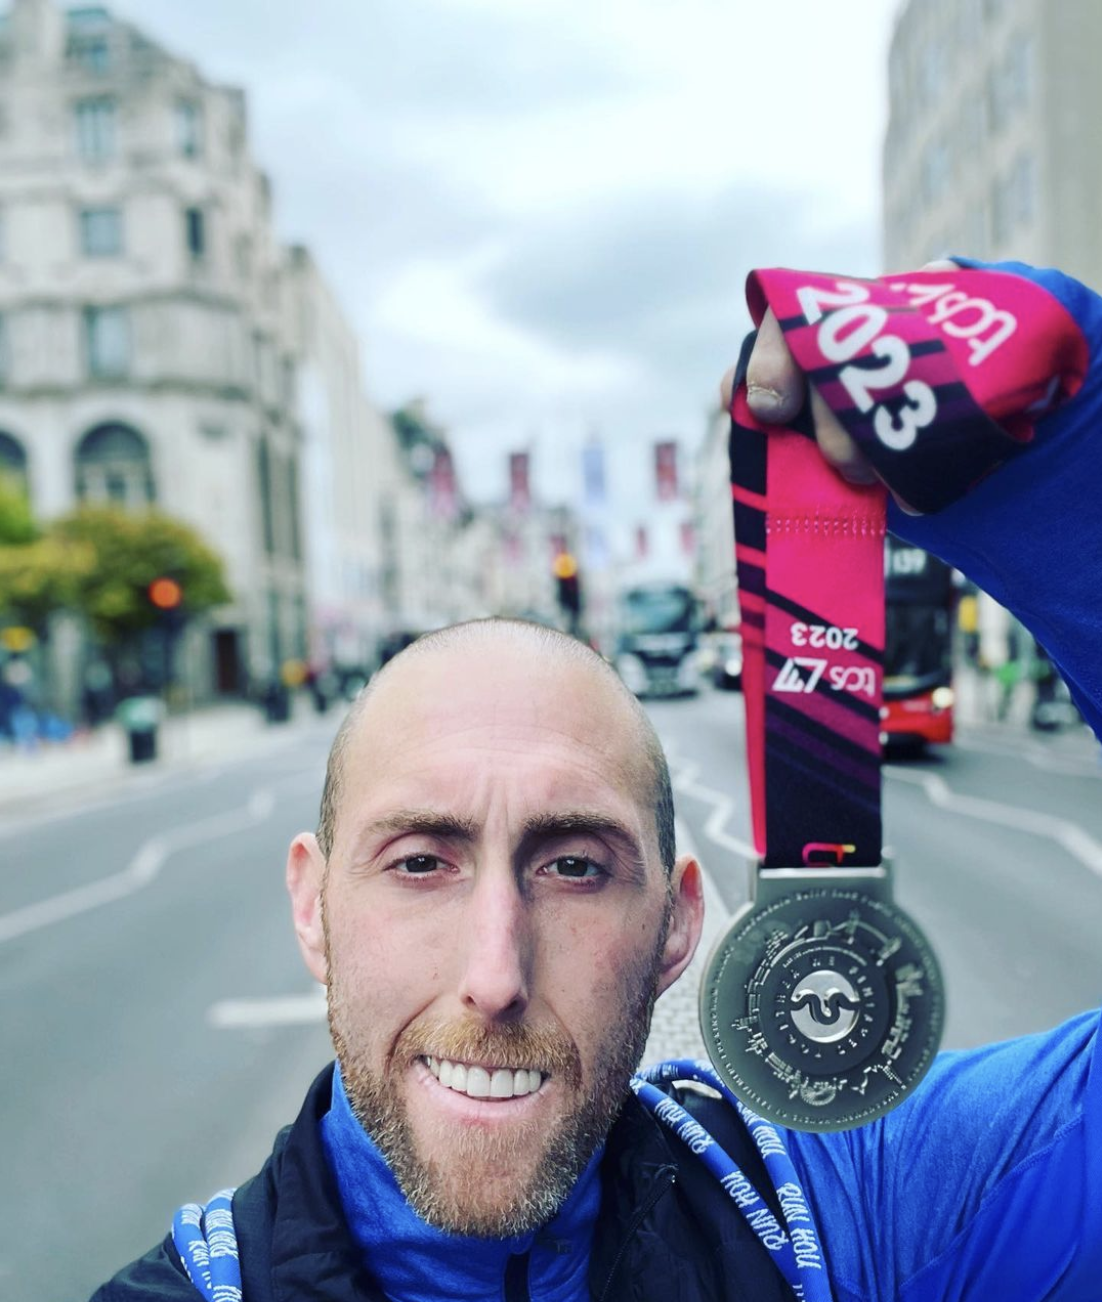 Greg with his medal from the London marathon – his 8th full marathon!